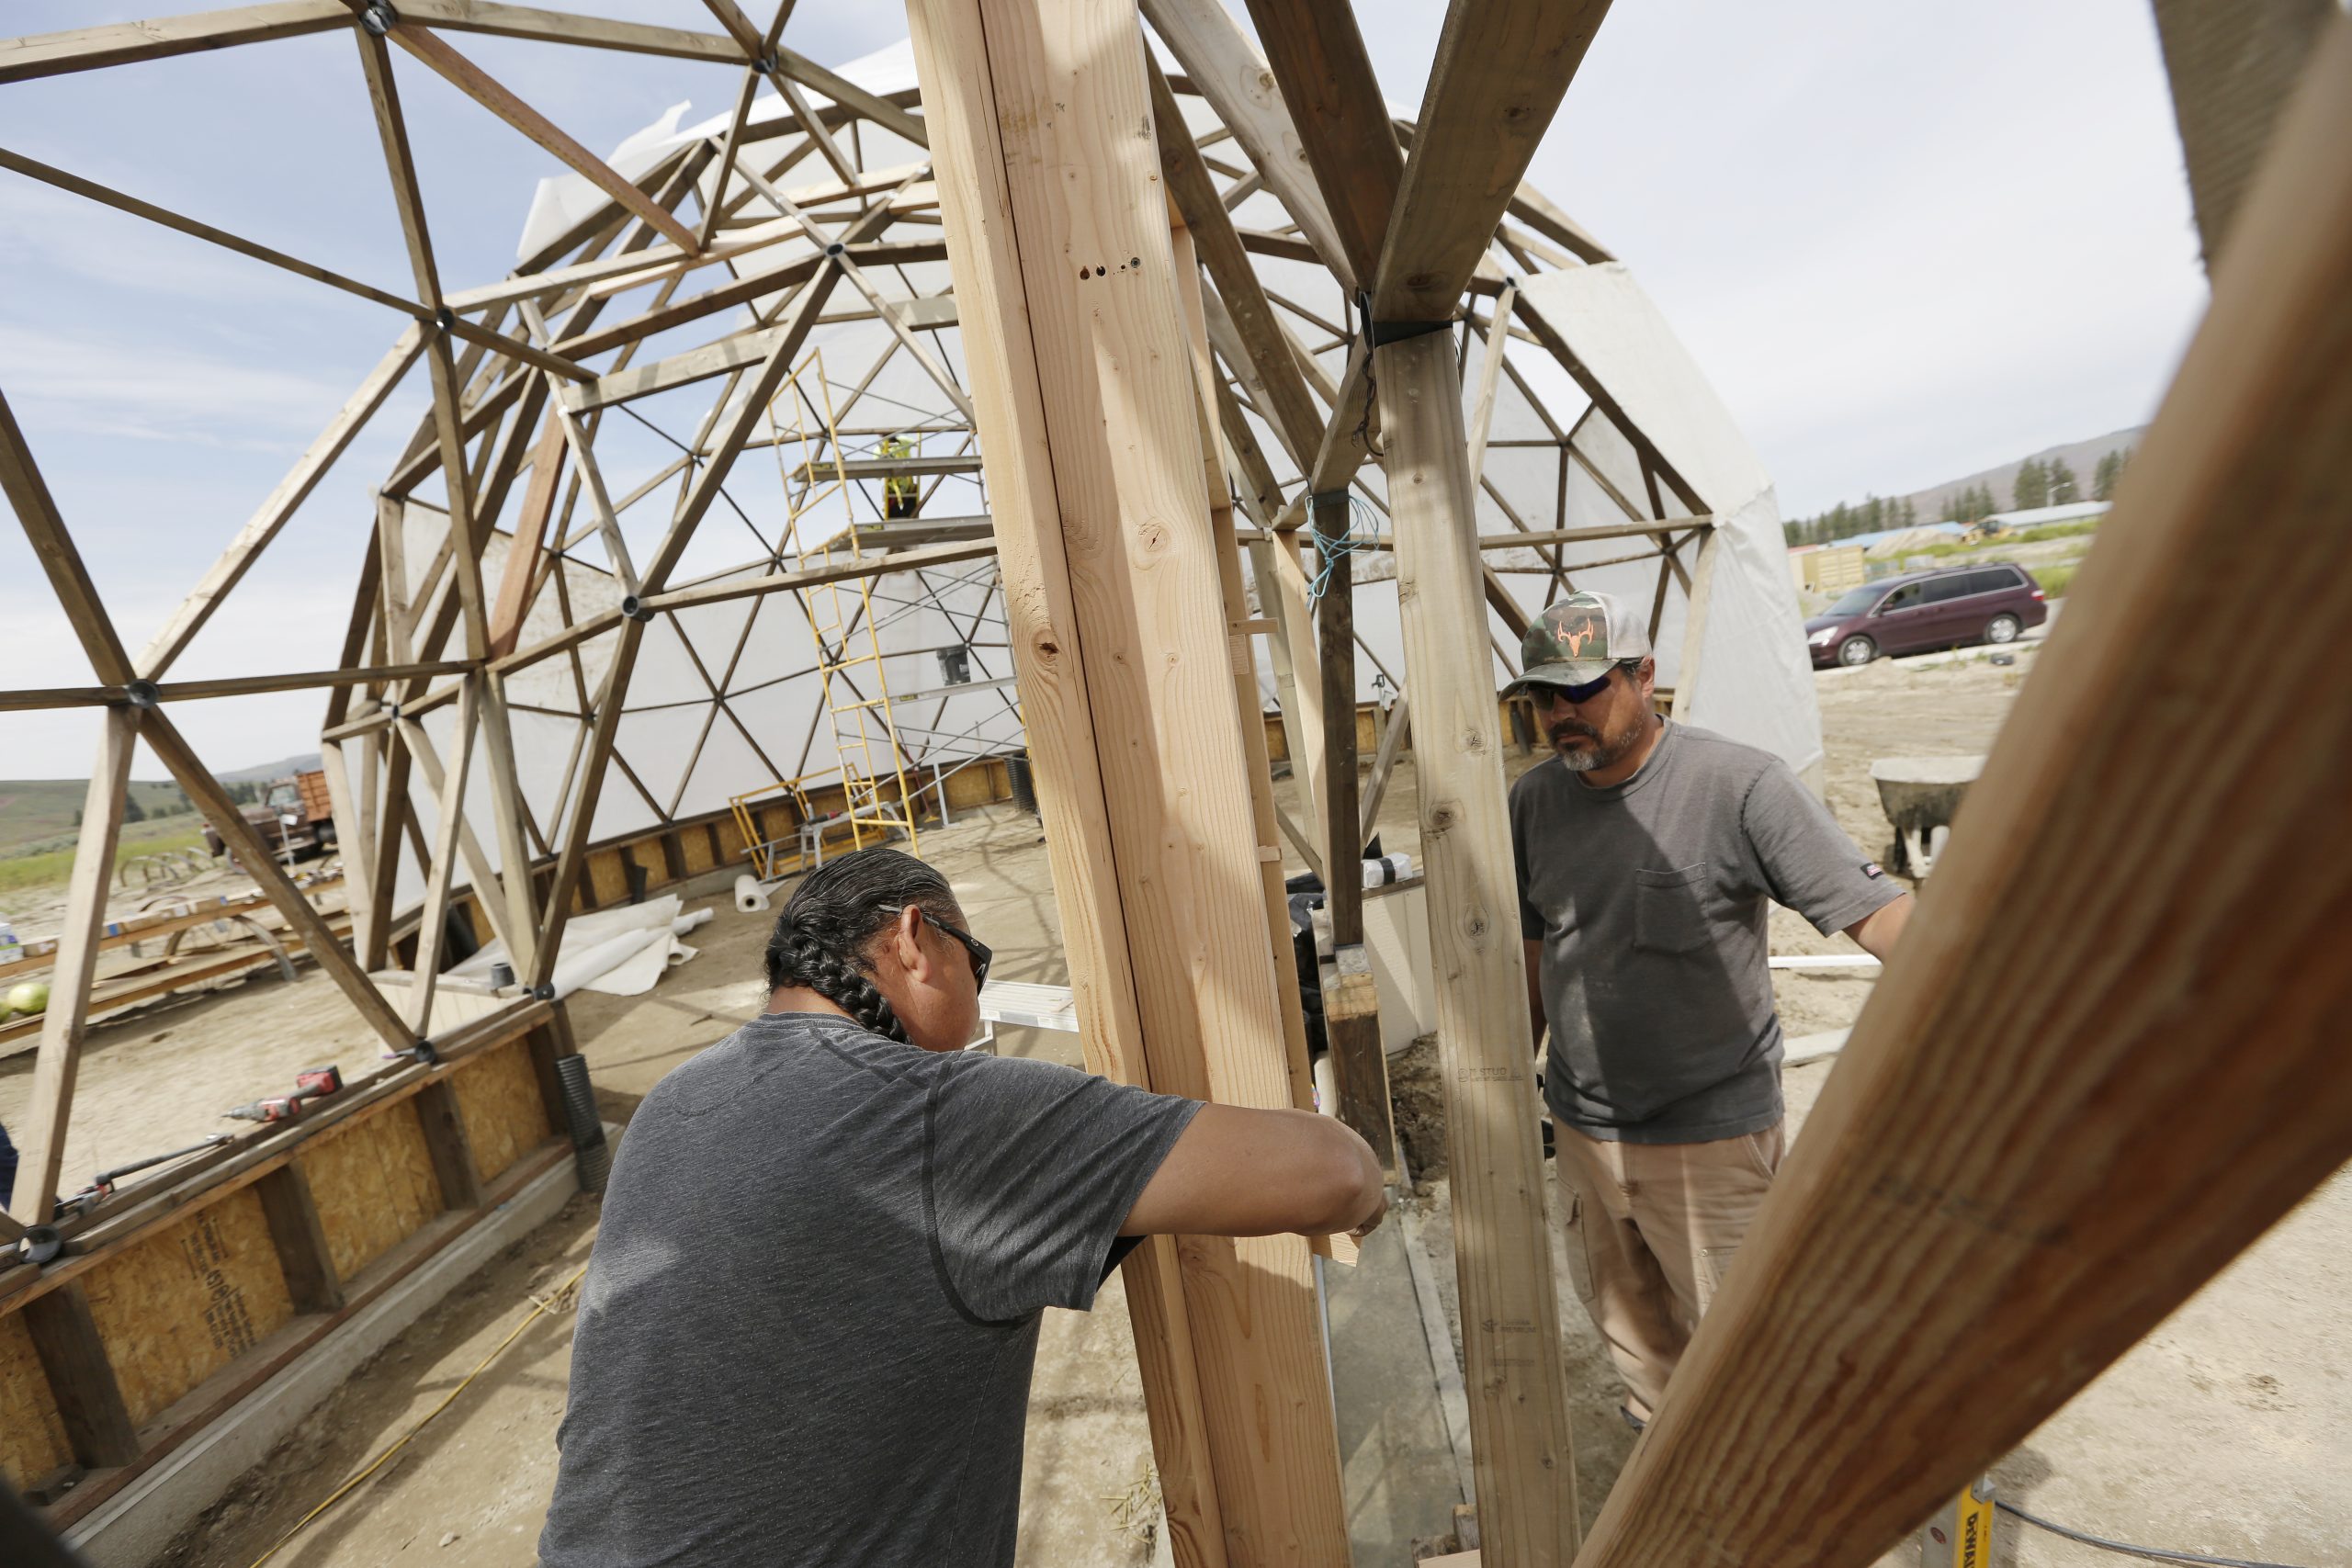 Ricky Gabriel, owner of Gabriel Construction and Development and strategic infrastructure partner with Konbit, left, and Doublas Lucht, trainee at Tribal Employment Rights Organization, install a door on a geodesic dome on Wednesday, June 15, 2022, in Nespelem, Washington.